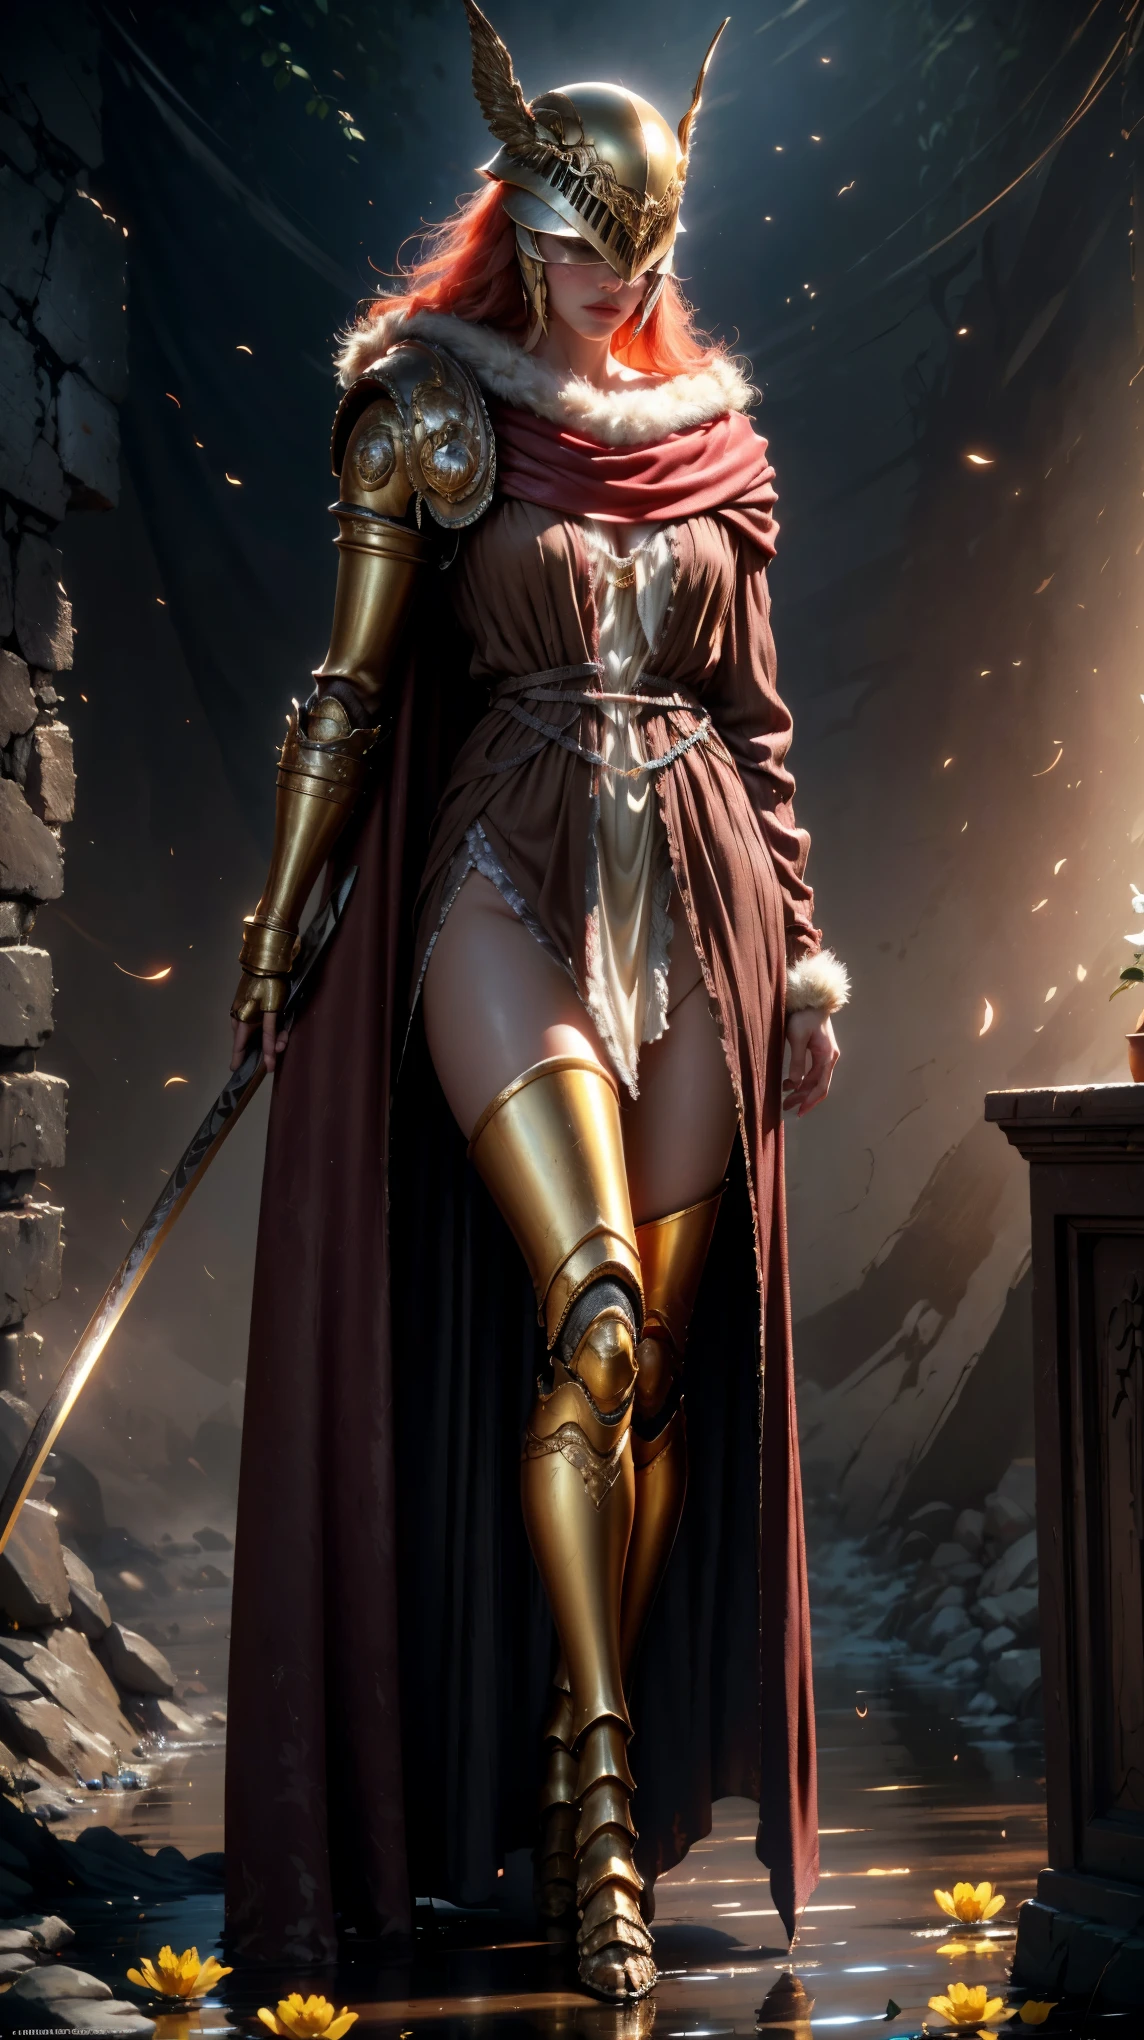 Highly detailed, High Quality, Masterpiece, beautiful, Malenia, prothestic leg, single mechanical arm, prosthesis, armor, cape, helmet, brown dress, sword, holding sword, full body, wide shot, flower, water, solo, sunset, stylebuff, night, (dark environment), Highly detailed, high quality, masterpiece, beautiful, 1 girl, prosthetic leg, single mechanical arm, prosthesis, MaleniaDef, armor, cape, helmet, brown dress, full body, (best quality)), ((masterpiece: 1.2) ), (extremely detailed: 1.1), (8k, high quality, cinematic, hyper realistic, illustration), (autodesk maya, octane rendering, unreal engine, game character, ray tracing, hdr), (16mm focal length , f/4 aperture, dynamic perspective, depth of field), (1 girl, dynamic angle, casting pose. malenia, long bright red hair like blood, brown thorn-woven dress, single mechanical arm, prosthetic leg, prosthesis, boots of battle. Cloak of blood, underlying golden armor, valley of withered flowers, ancient sculptures around it), 3d, realistic, CG, 3D model, beautiful, elegant, confident, (hdri, bloom, edge lighting, soft lighting, discreet), zhongfenghua, delicate\(armor\) ancient robe, golden helmet, mage_glam, caftan,